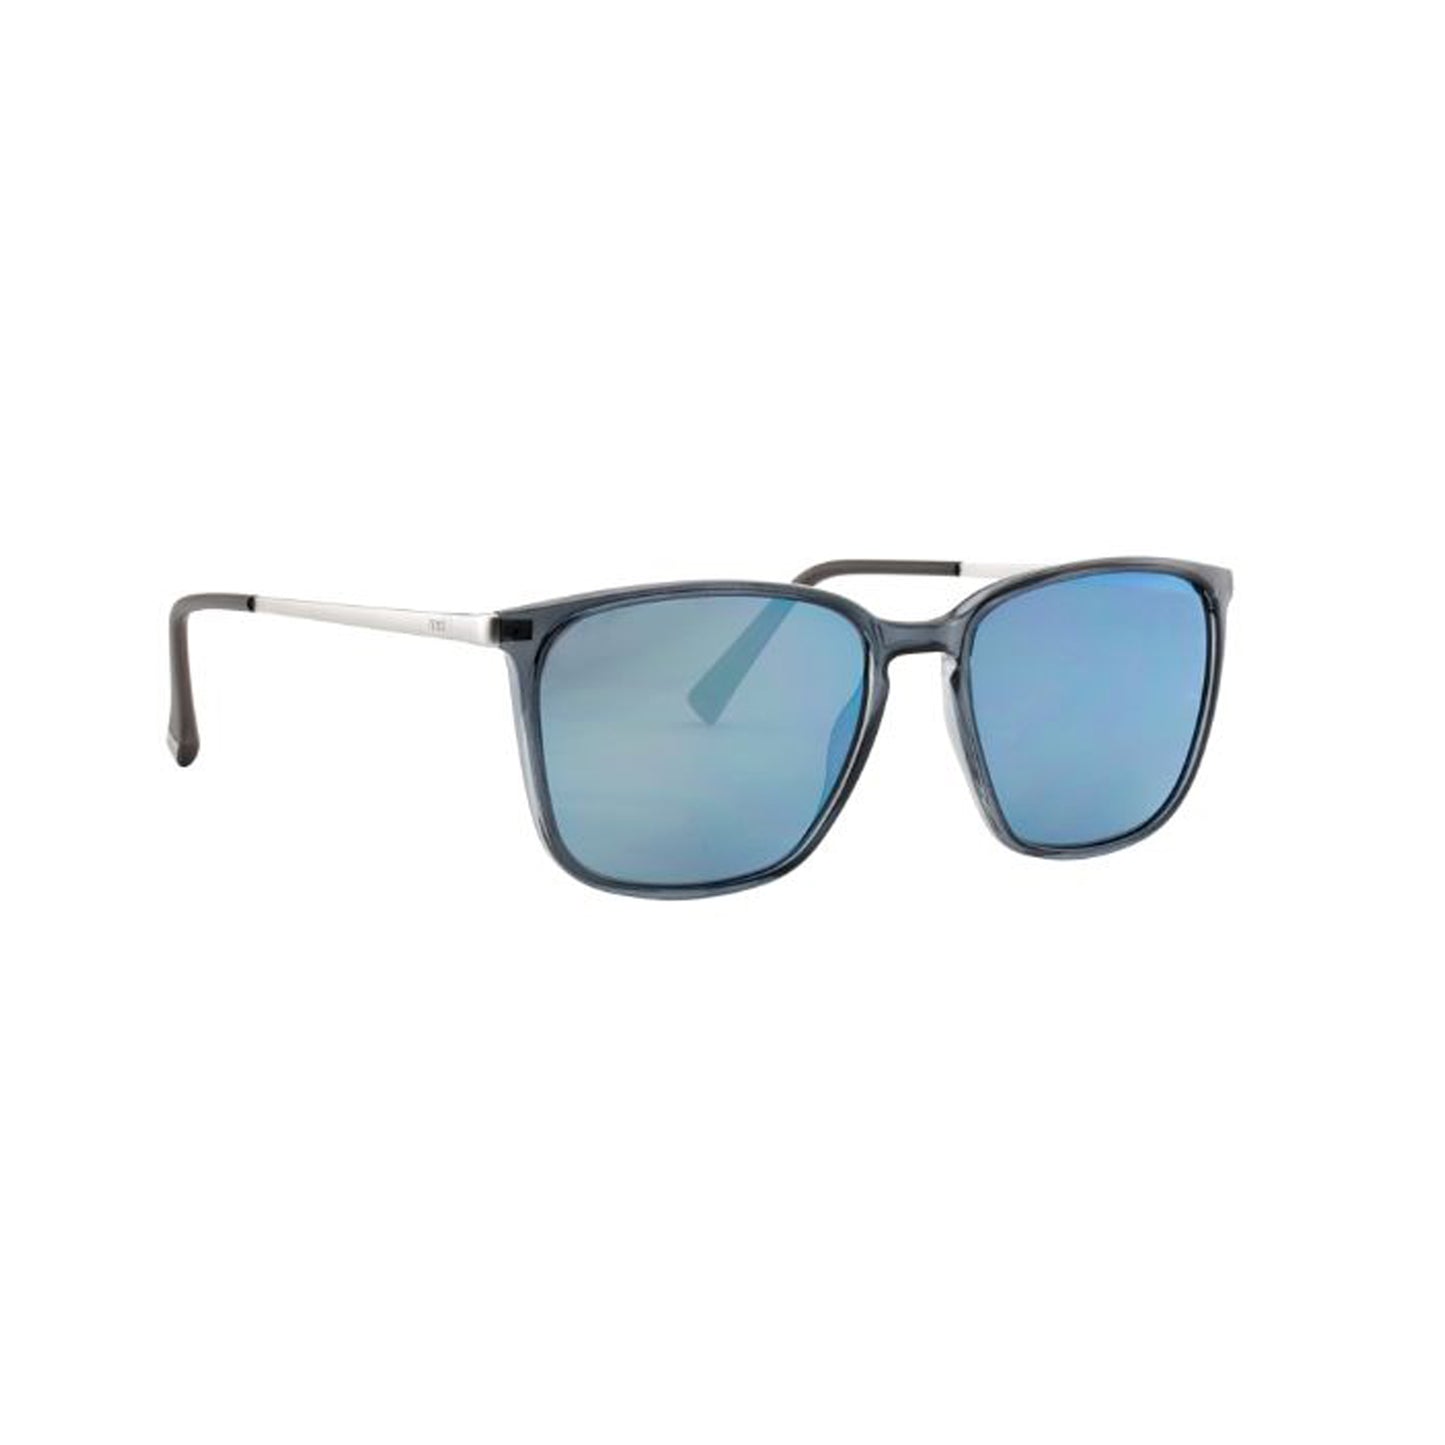 Zeiss Eyewear Blue Square Acetate Full Rim Sunglasses. Made in Germany ZS92001 F220